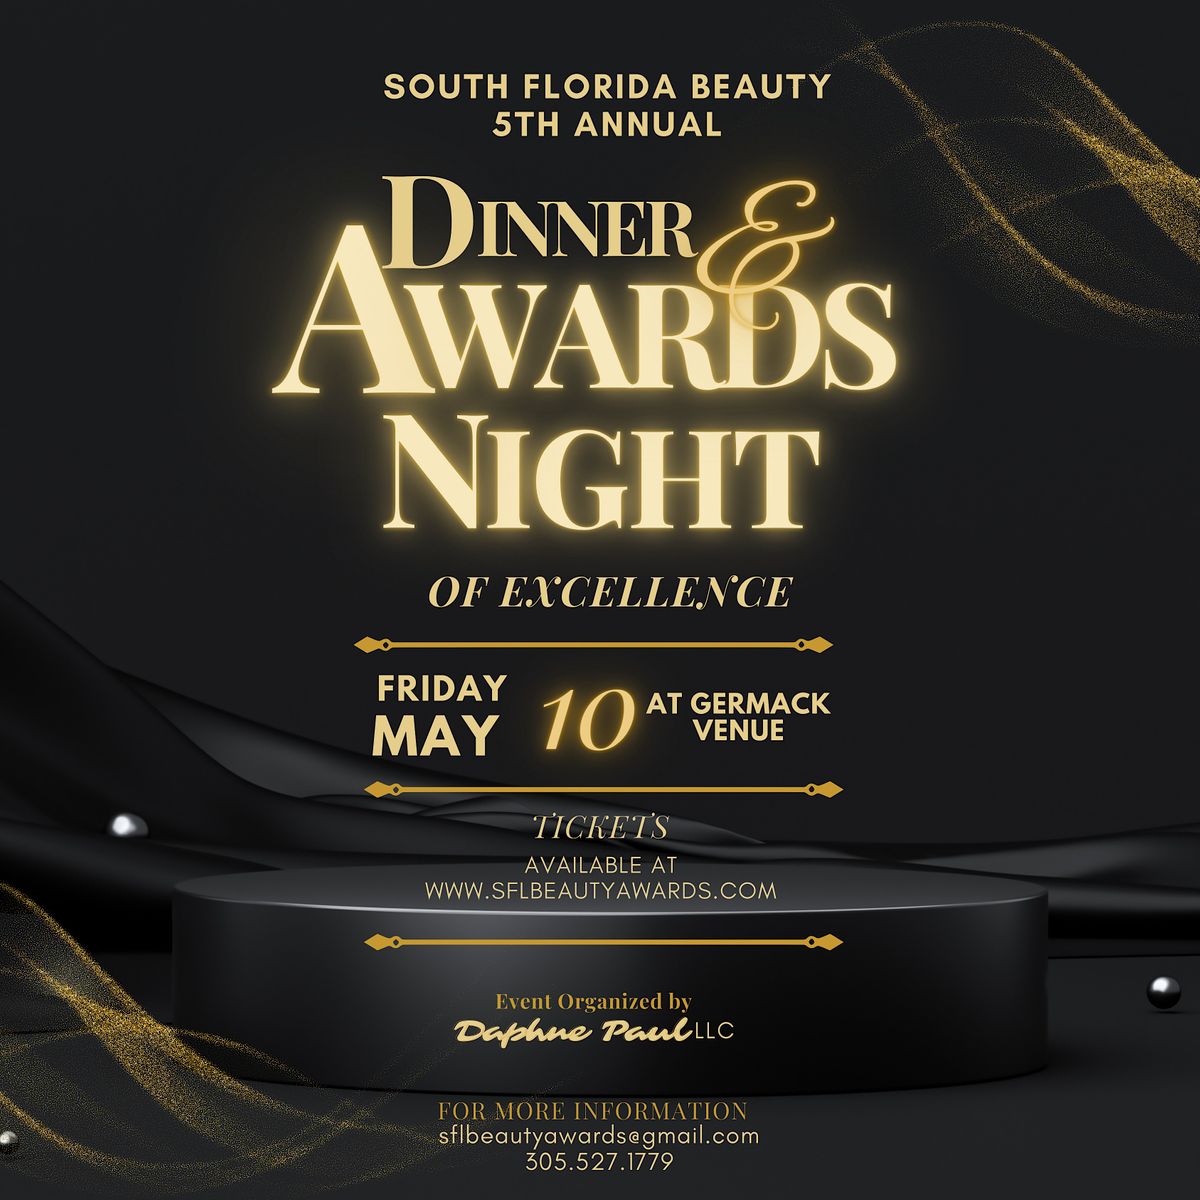 South Florida Beauty Awards 5th Annual Anniversary